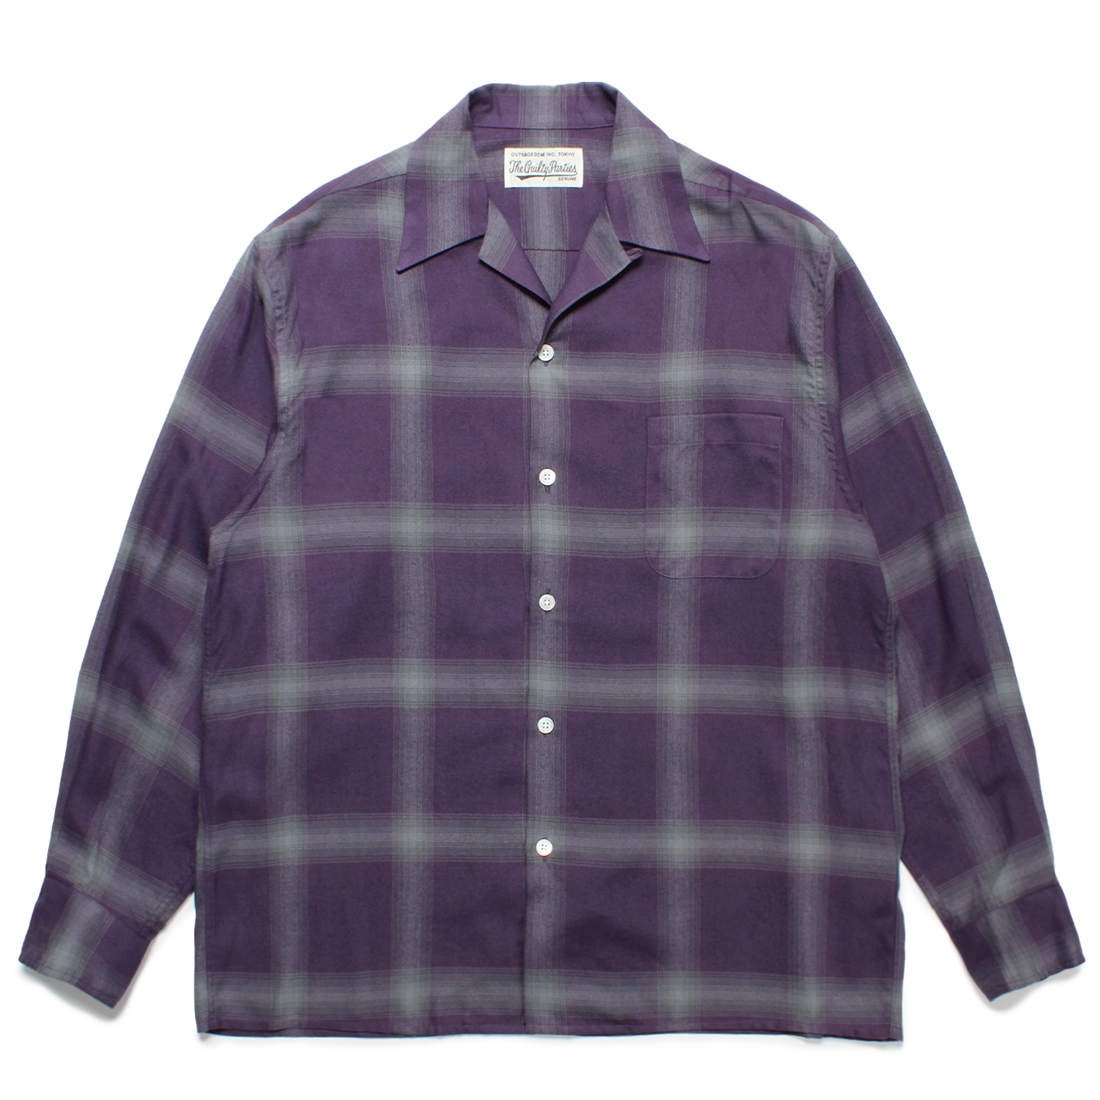 23aw OMBRE CHECK OPEN COLLAR SHIRT L/Sでは37000で大丈夫です